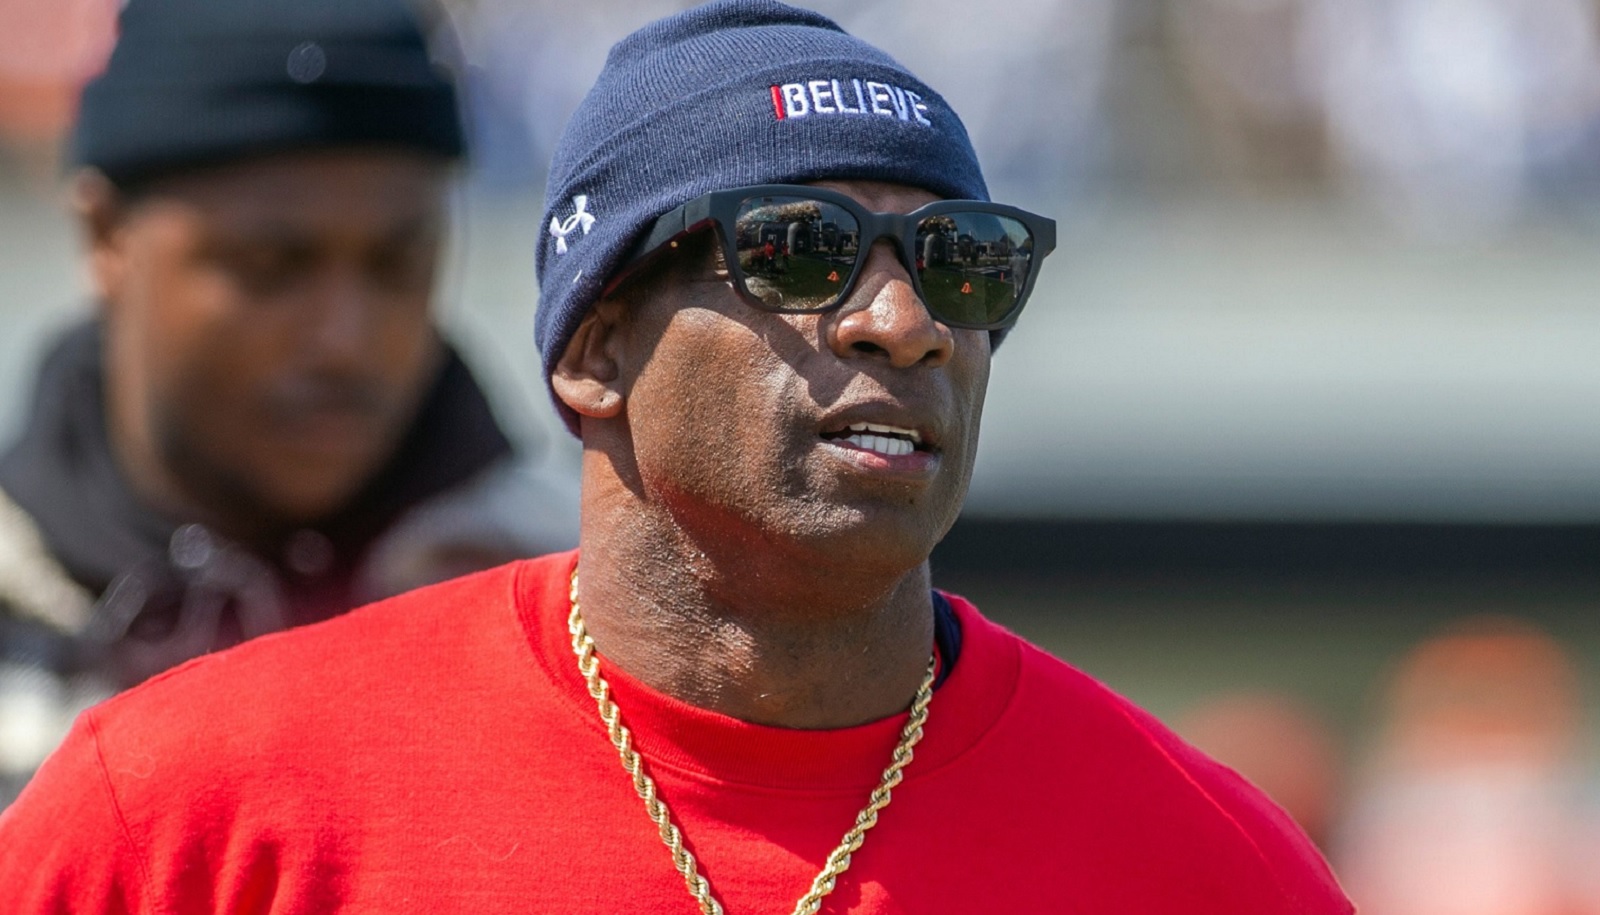 Deion Sanders wanted to play for the Bengals, but says they wouldn't even  call him back